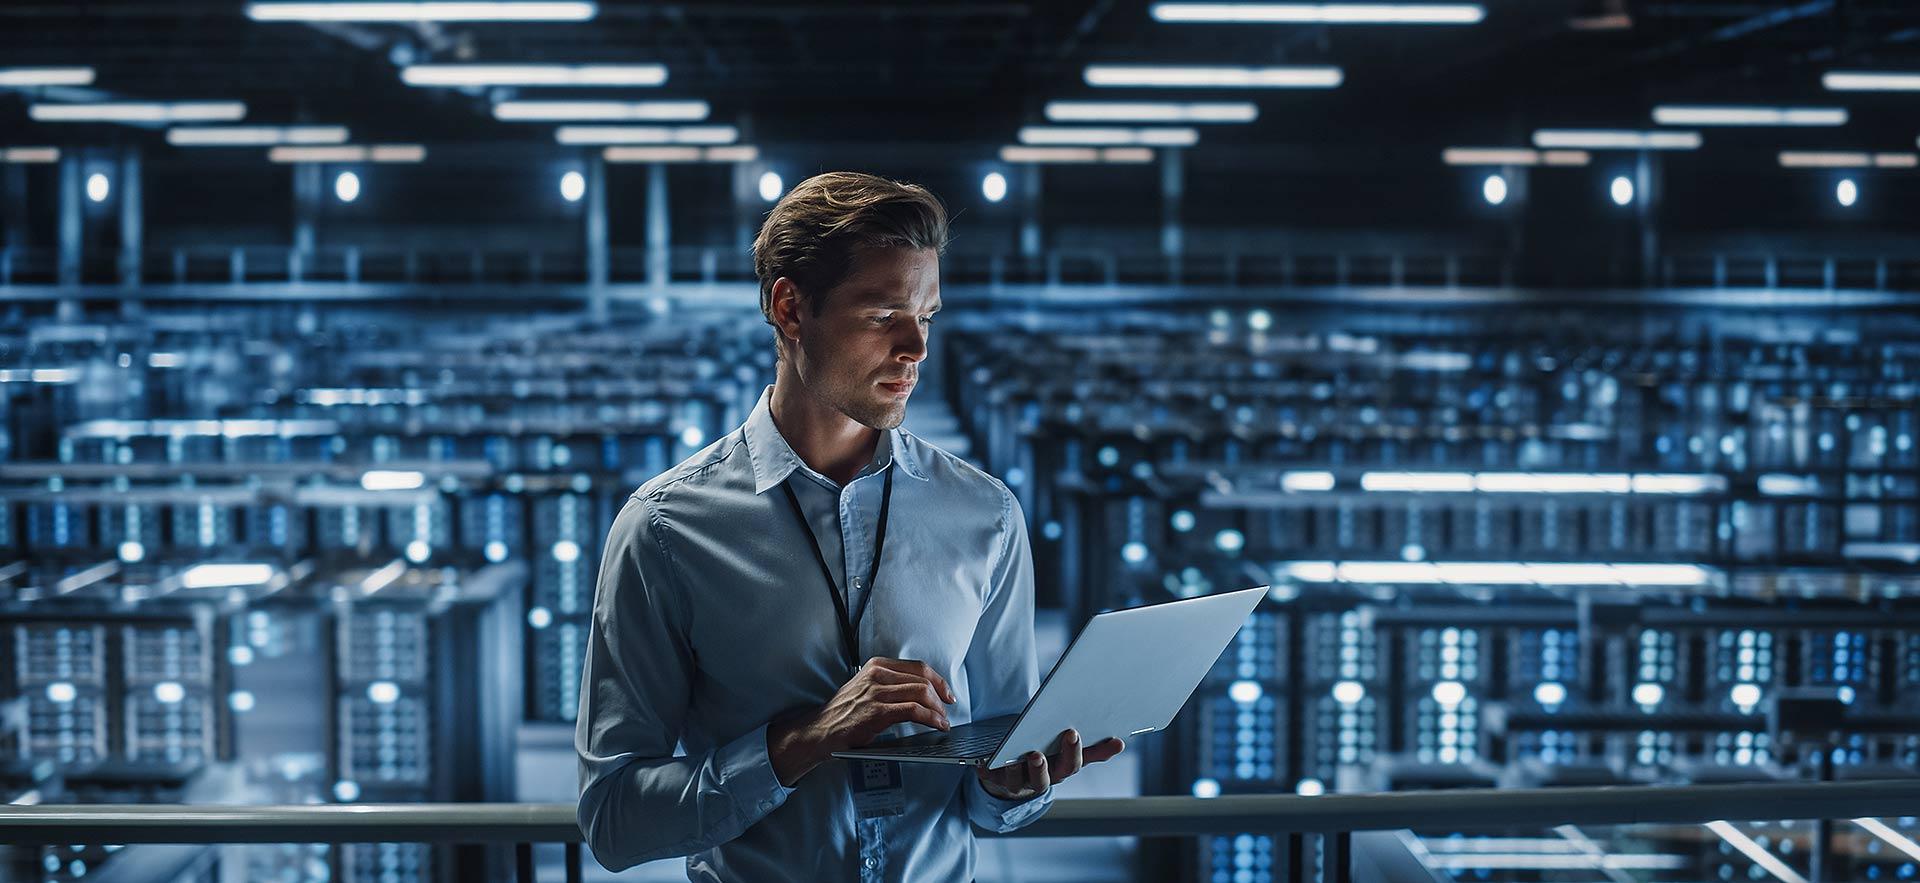 Man holding laptop with servers in background